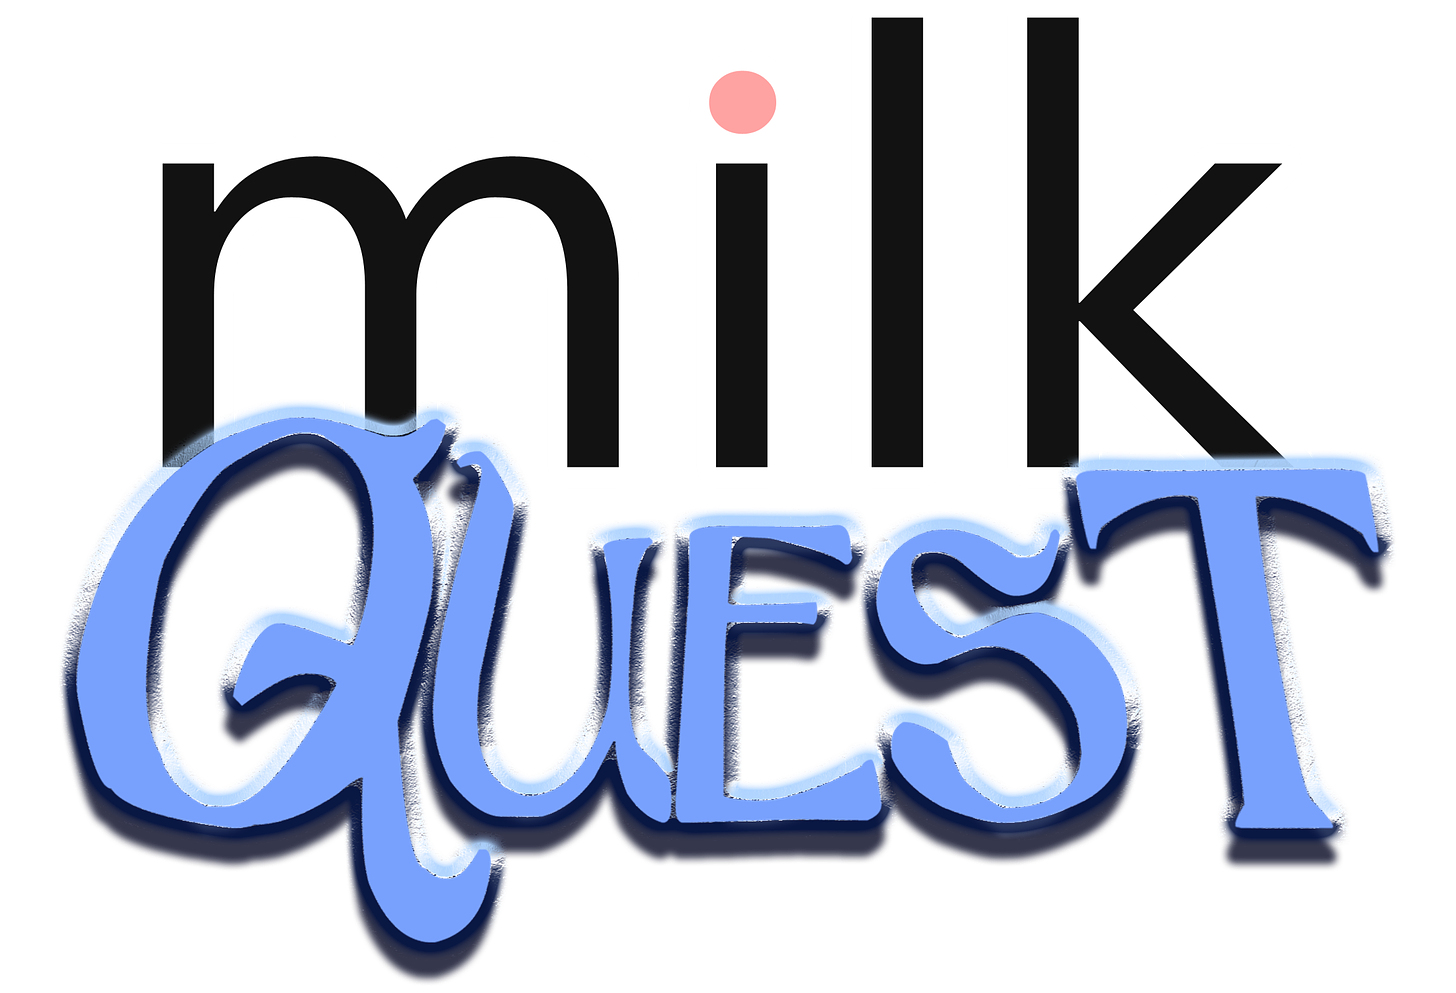 milkquest logo, which has the milk part of the milk plus visual logo on top and a gaudy blue QUEST underneath